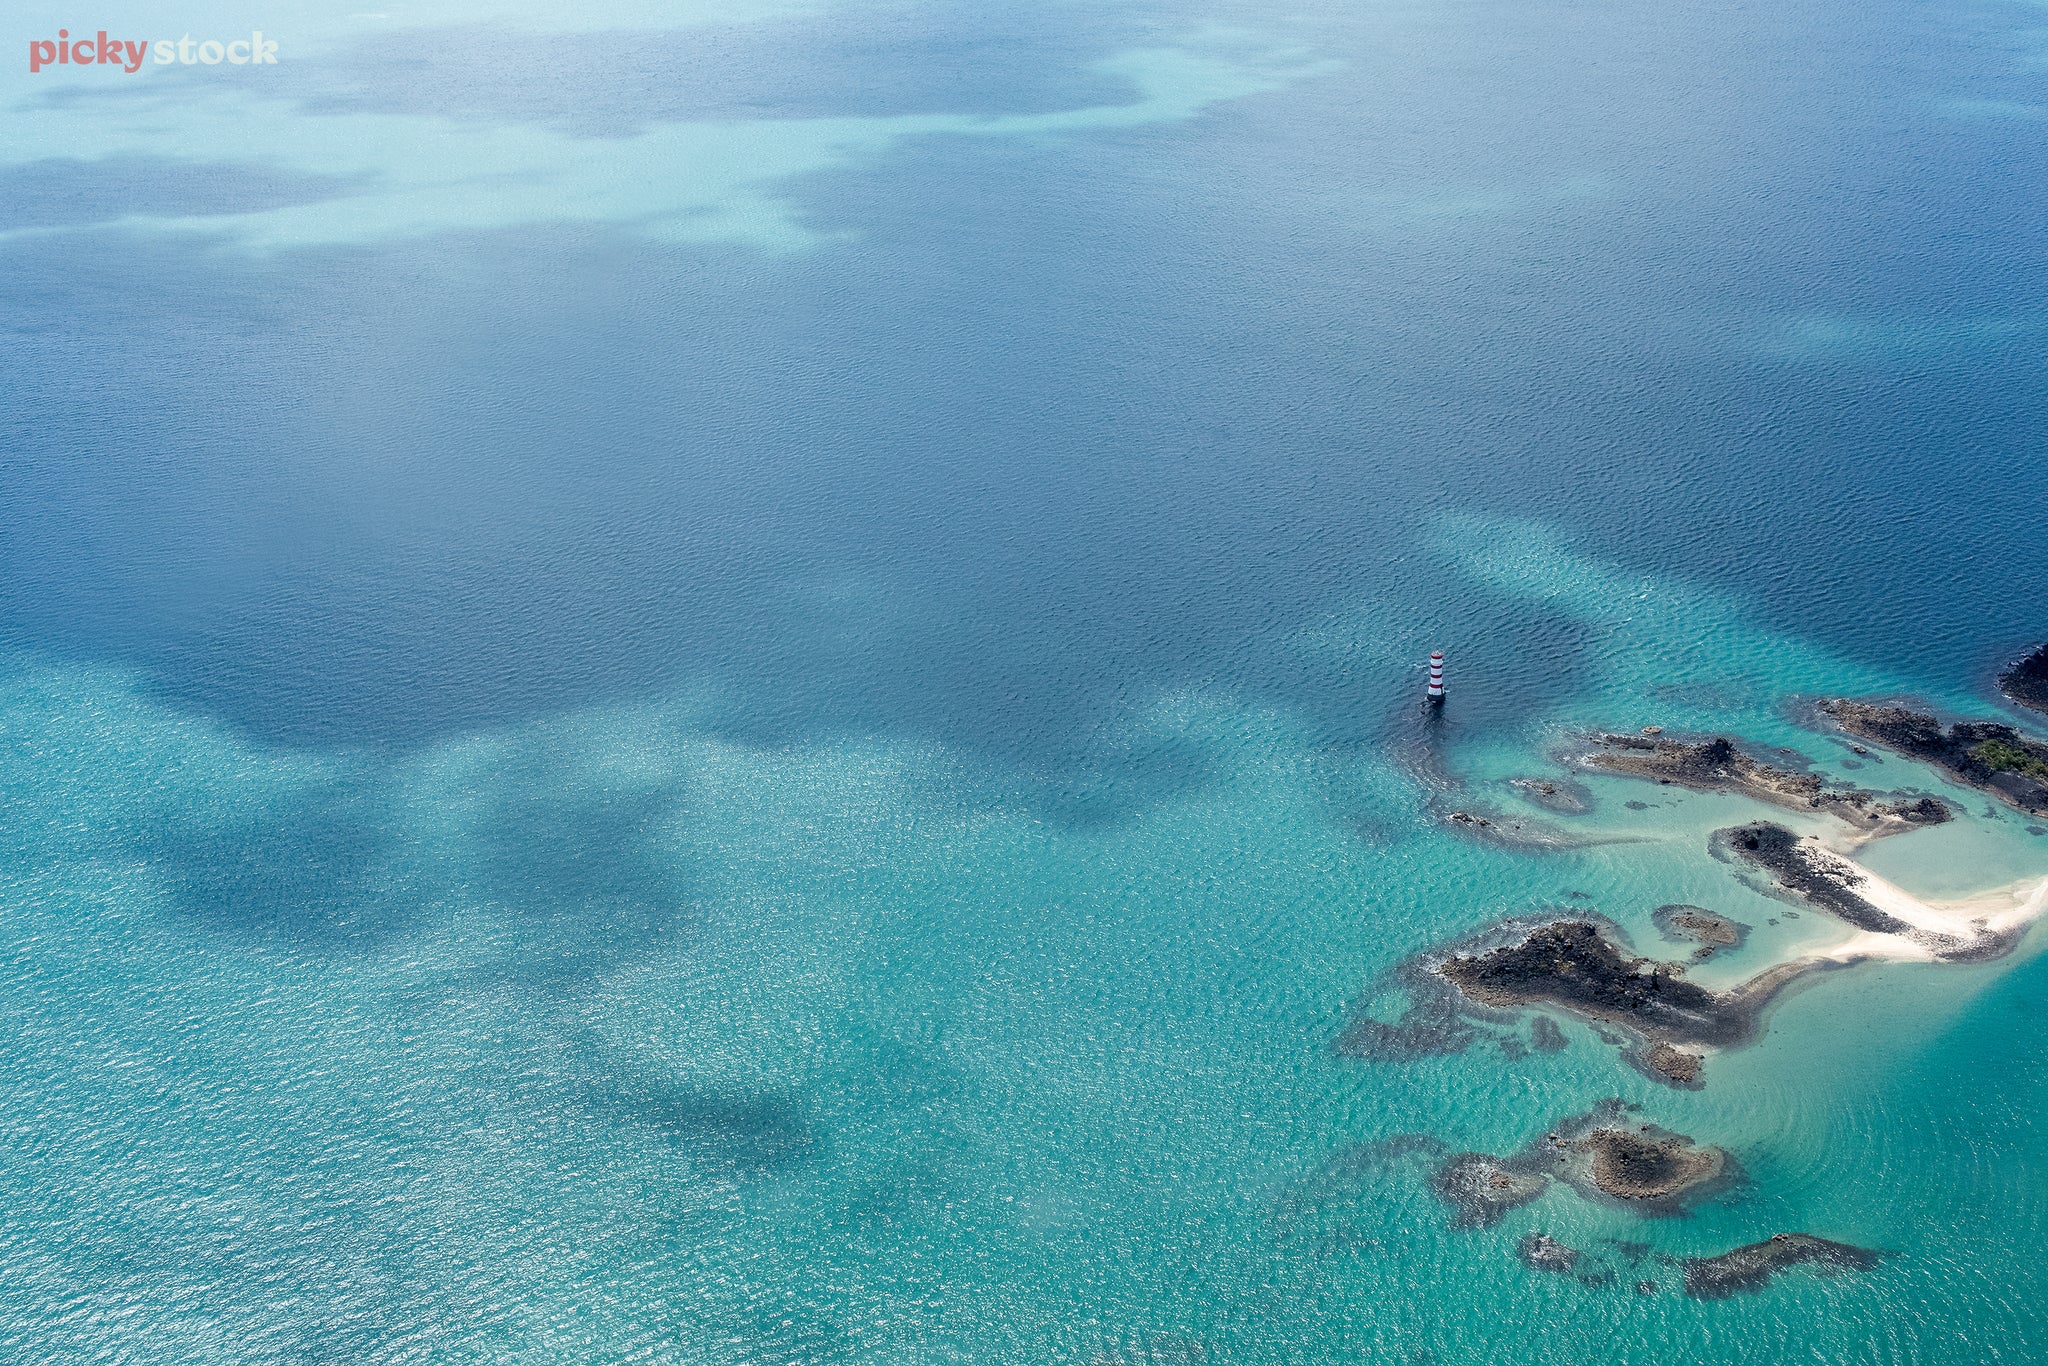 Landscape of a high aerial shot of a sandy reef and lighthouse, the clear waters are a patchwork f different hues and depths.